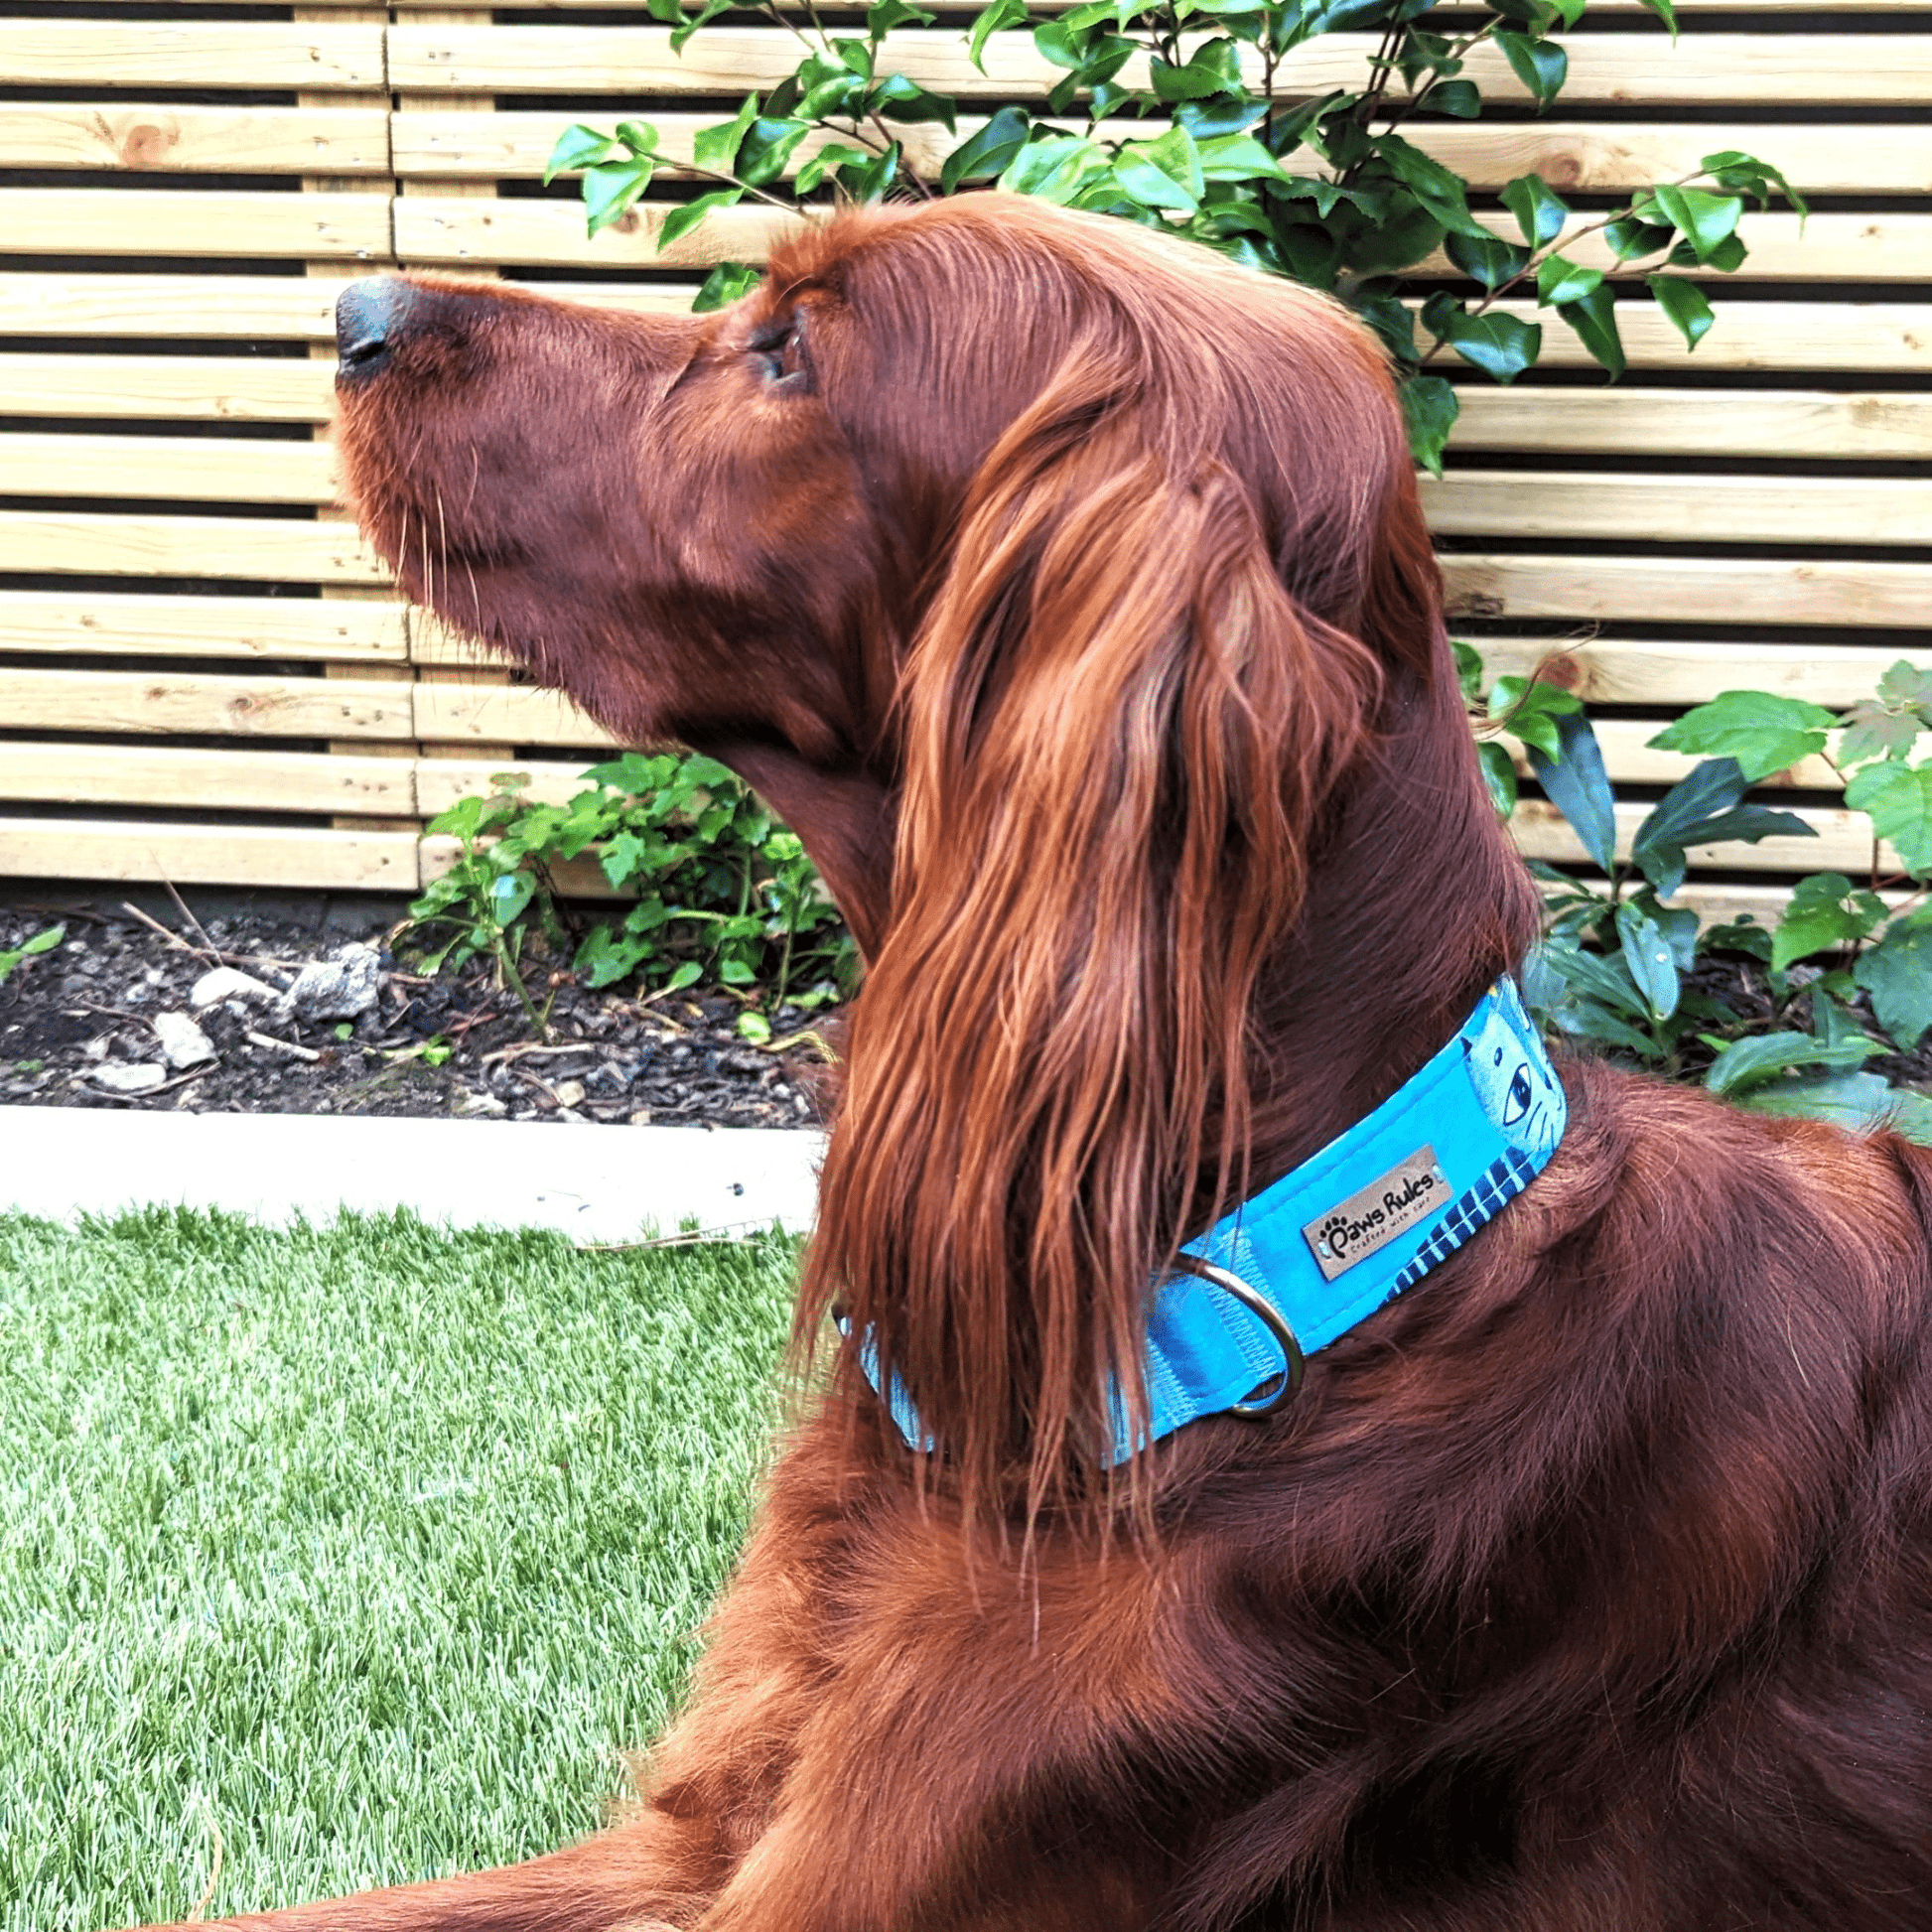 Blue Cat Silhouette Dog Collar - Enhance your dog's look with this delightful blue collar featuring a cute and intricate cat silhouette.